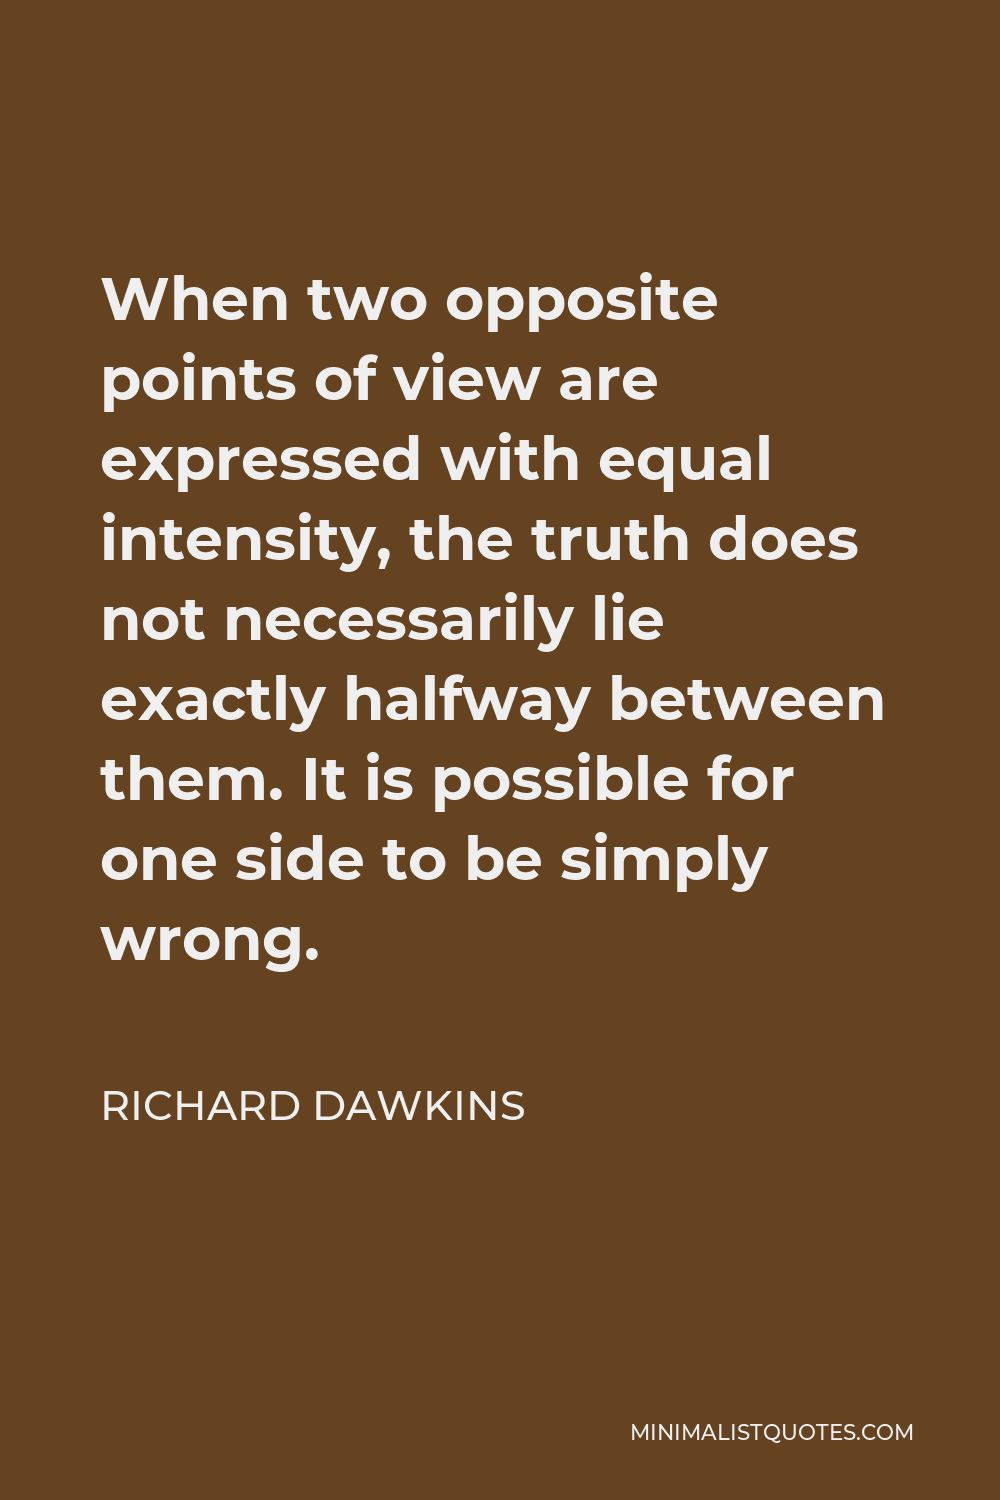 Richard Dawkins Quote - When two opposite points of view are expressed with equal intensity, the truth does not necessarily lie exactly halfway between them. It is possible for one side to be simply wrong.